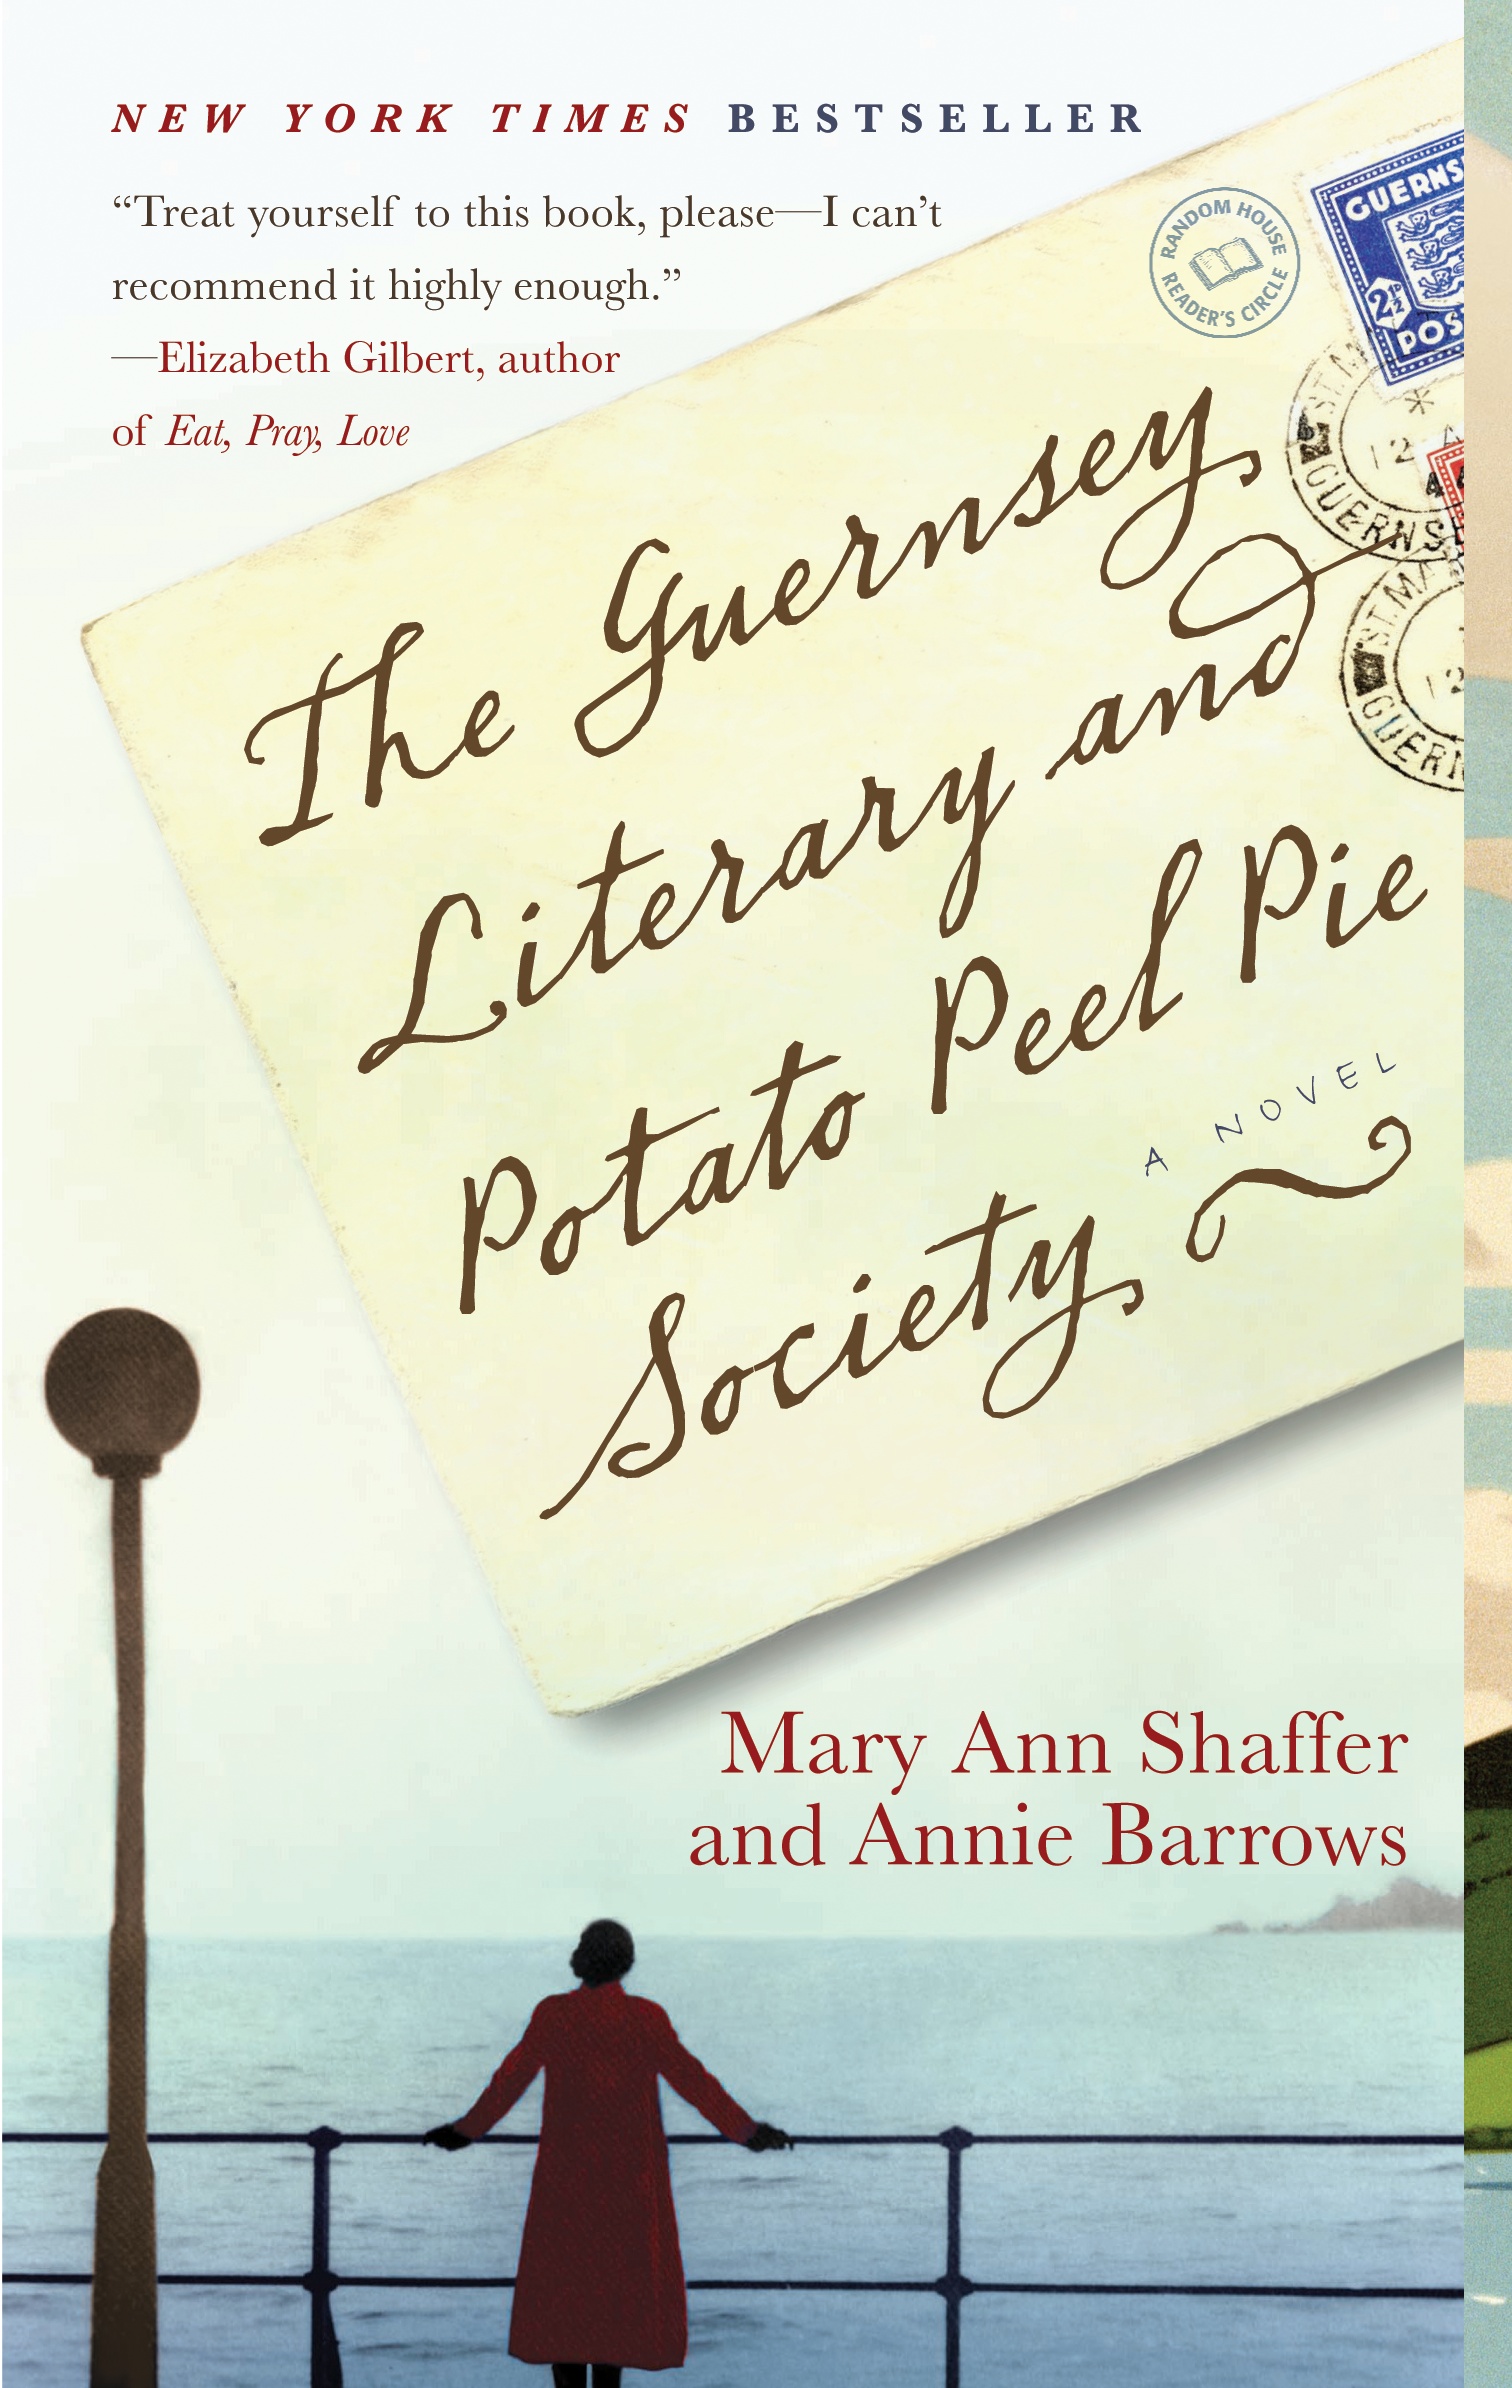 Book Review The Guernsey Literary And Potato Peel Pie Society By Mary Ann Shaffer And Annie